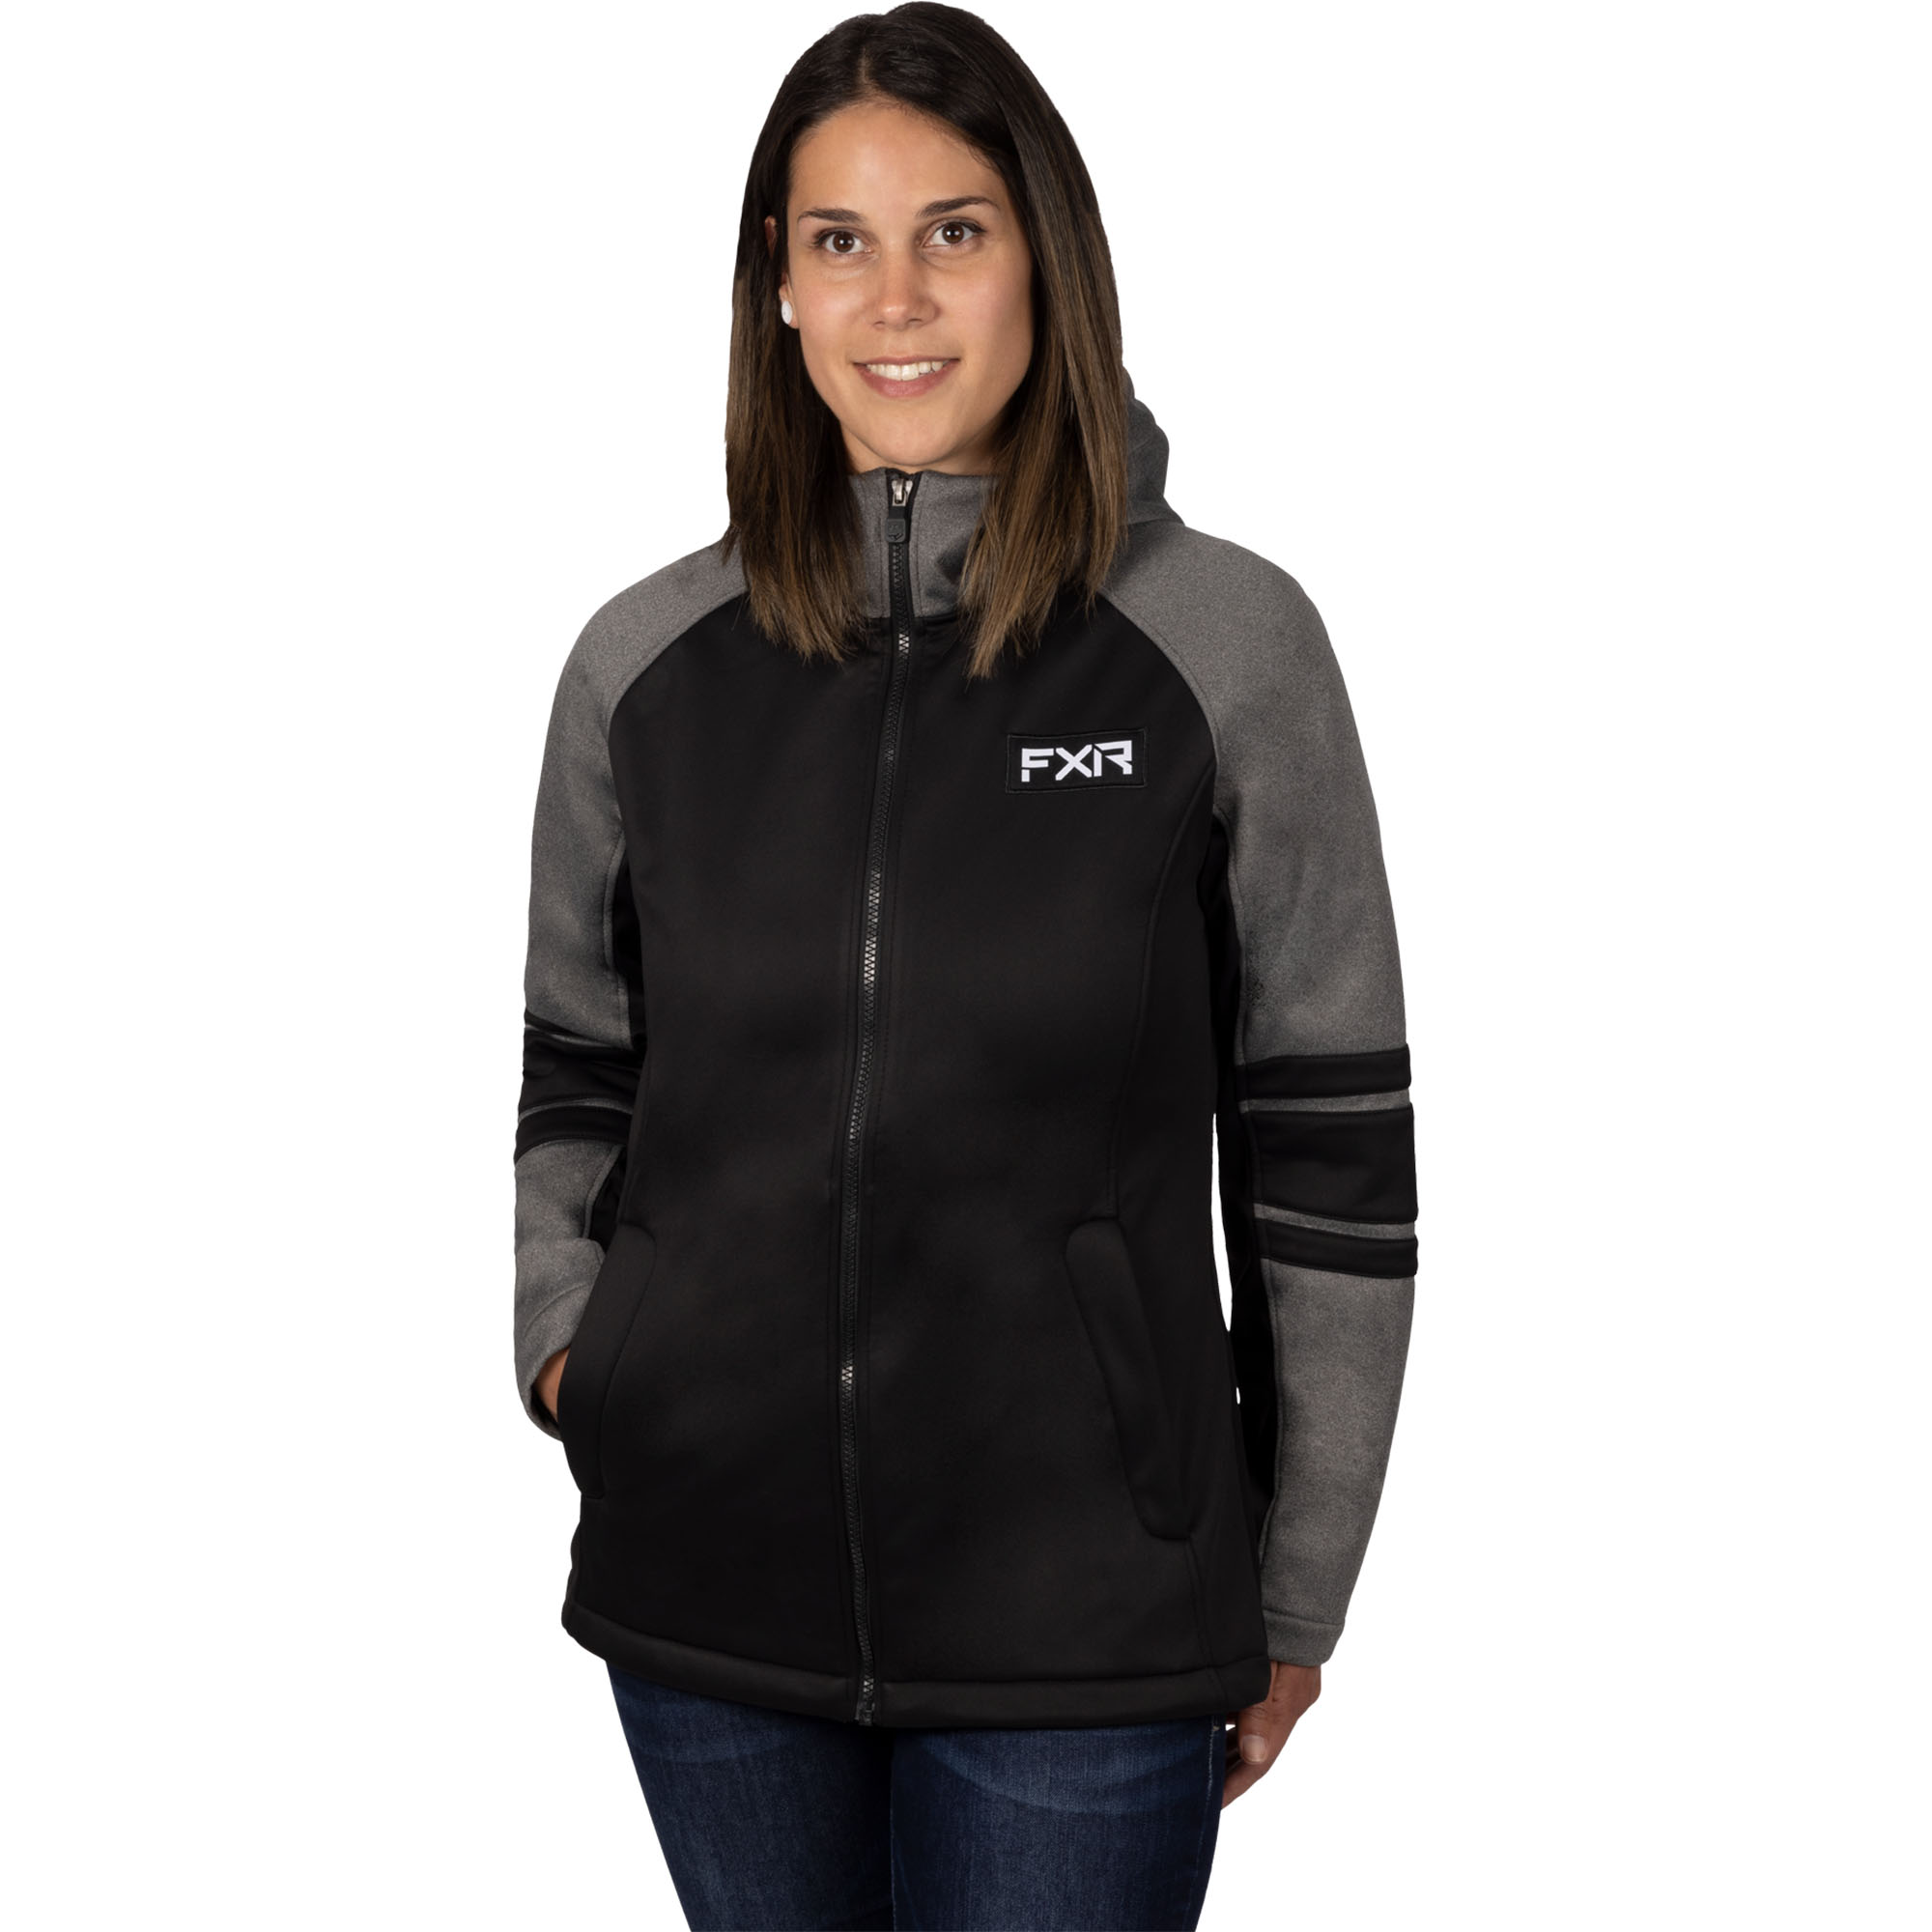 FXR  Womens Maverick Softshell Jacket Grey Heather Dusty Rose DWR HydrX Thermal - Small 231006-0798-07 - image 1 of 1